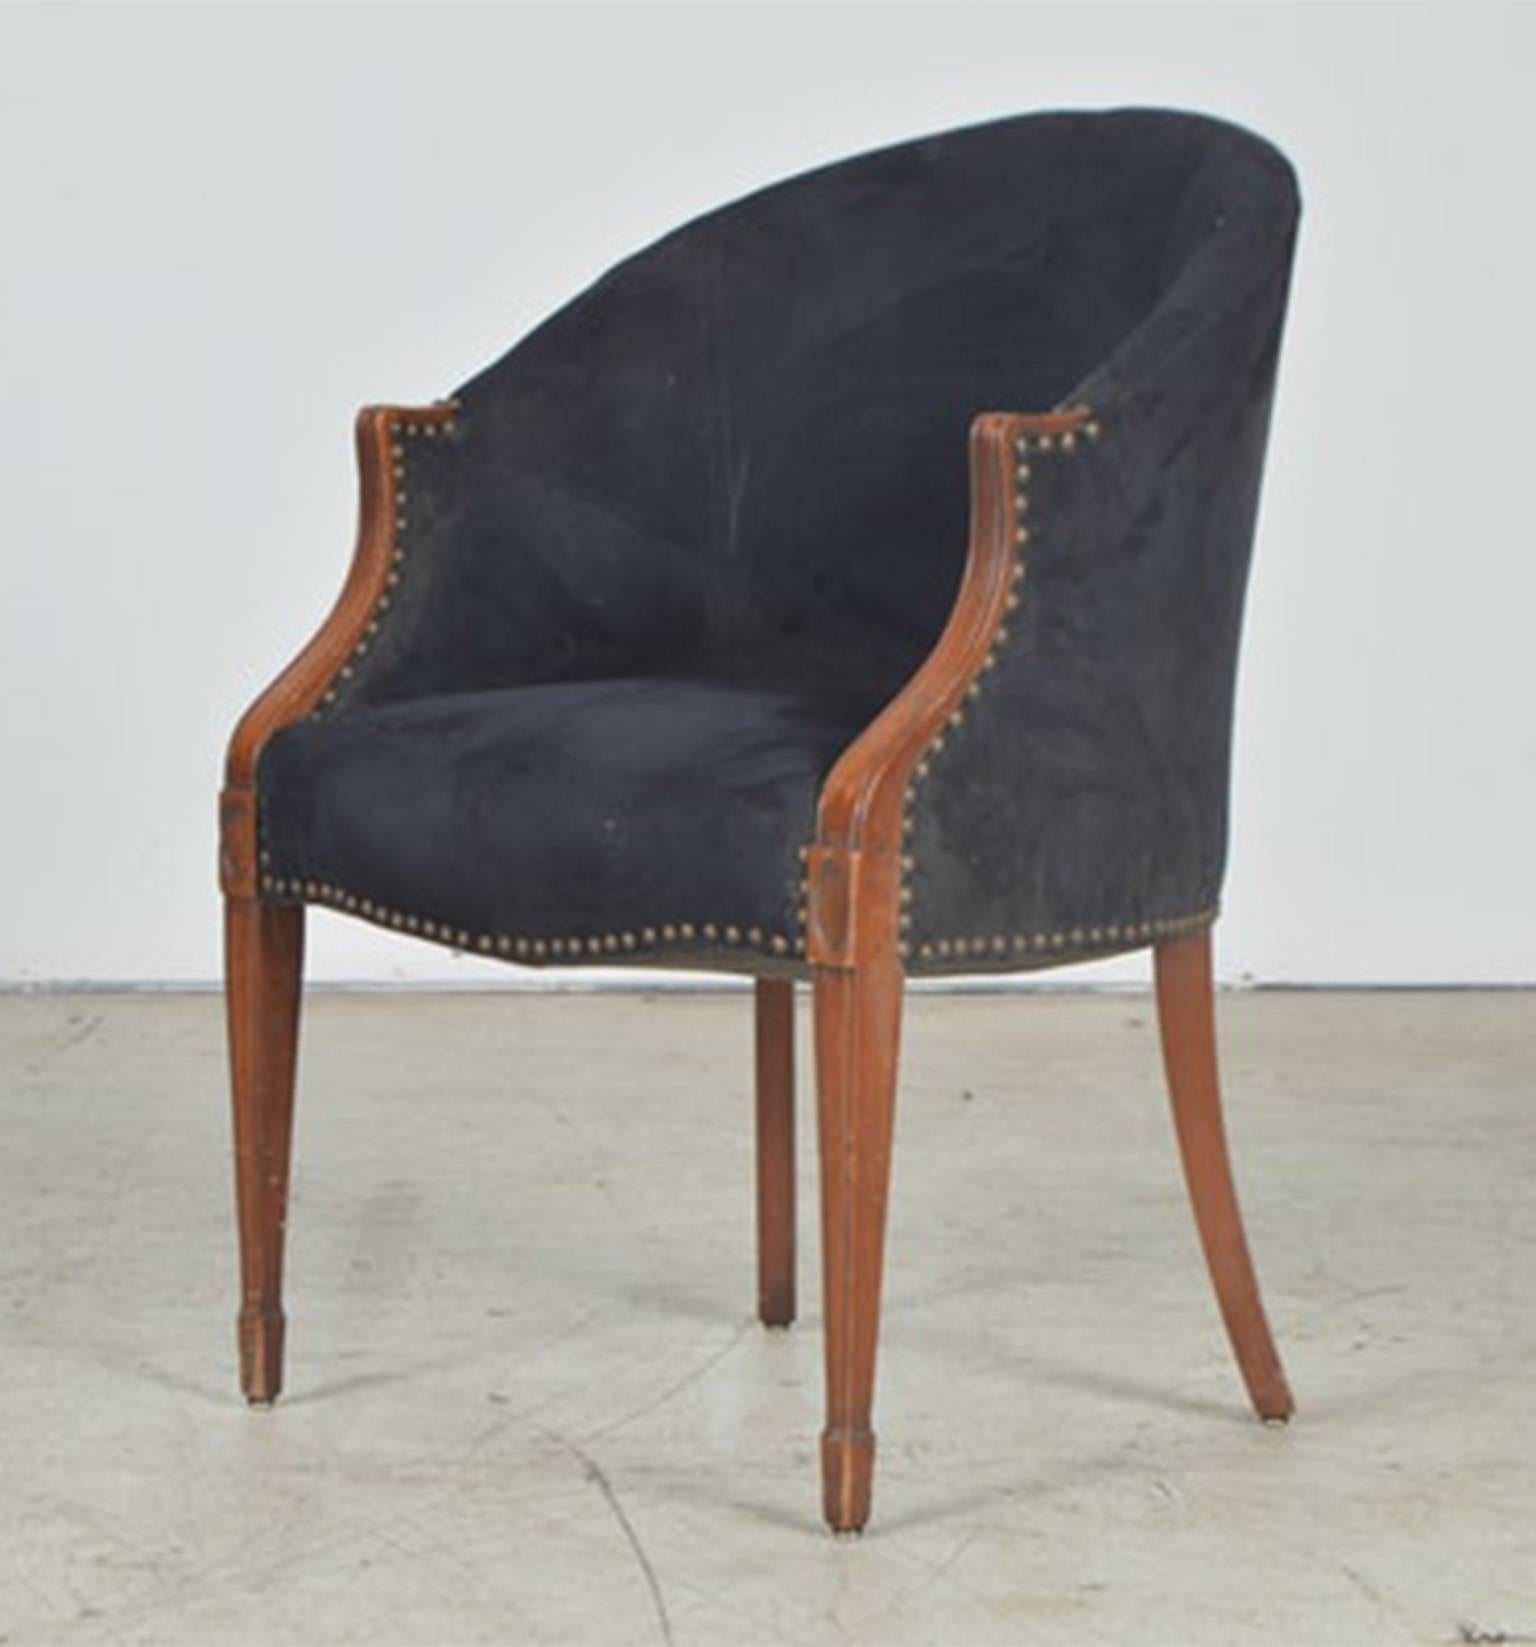 Great Britain (UK) Four Black Neoclassical Side Chairs with Nailhead Details